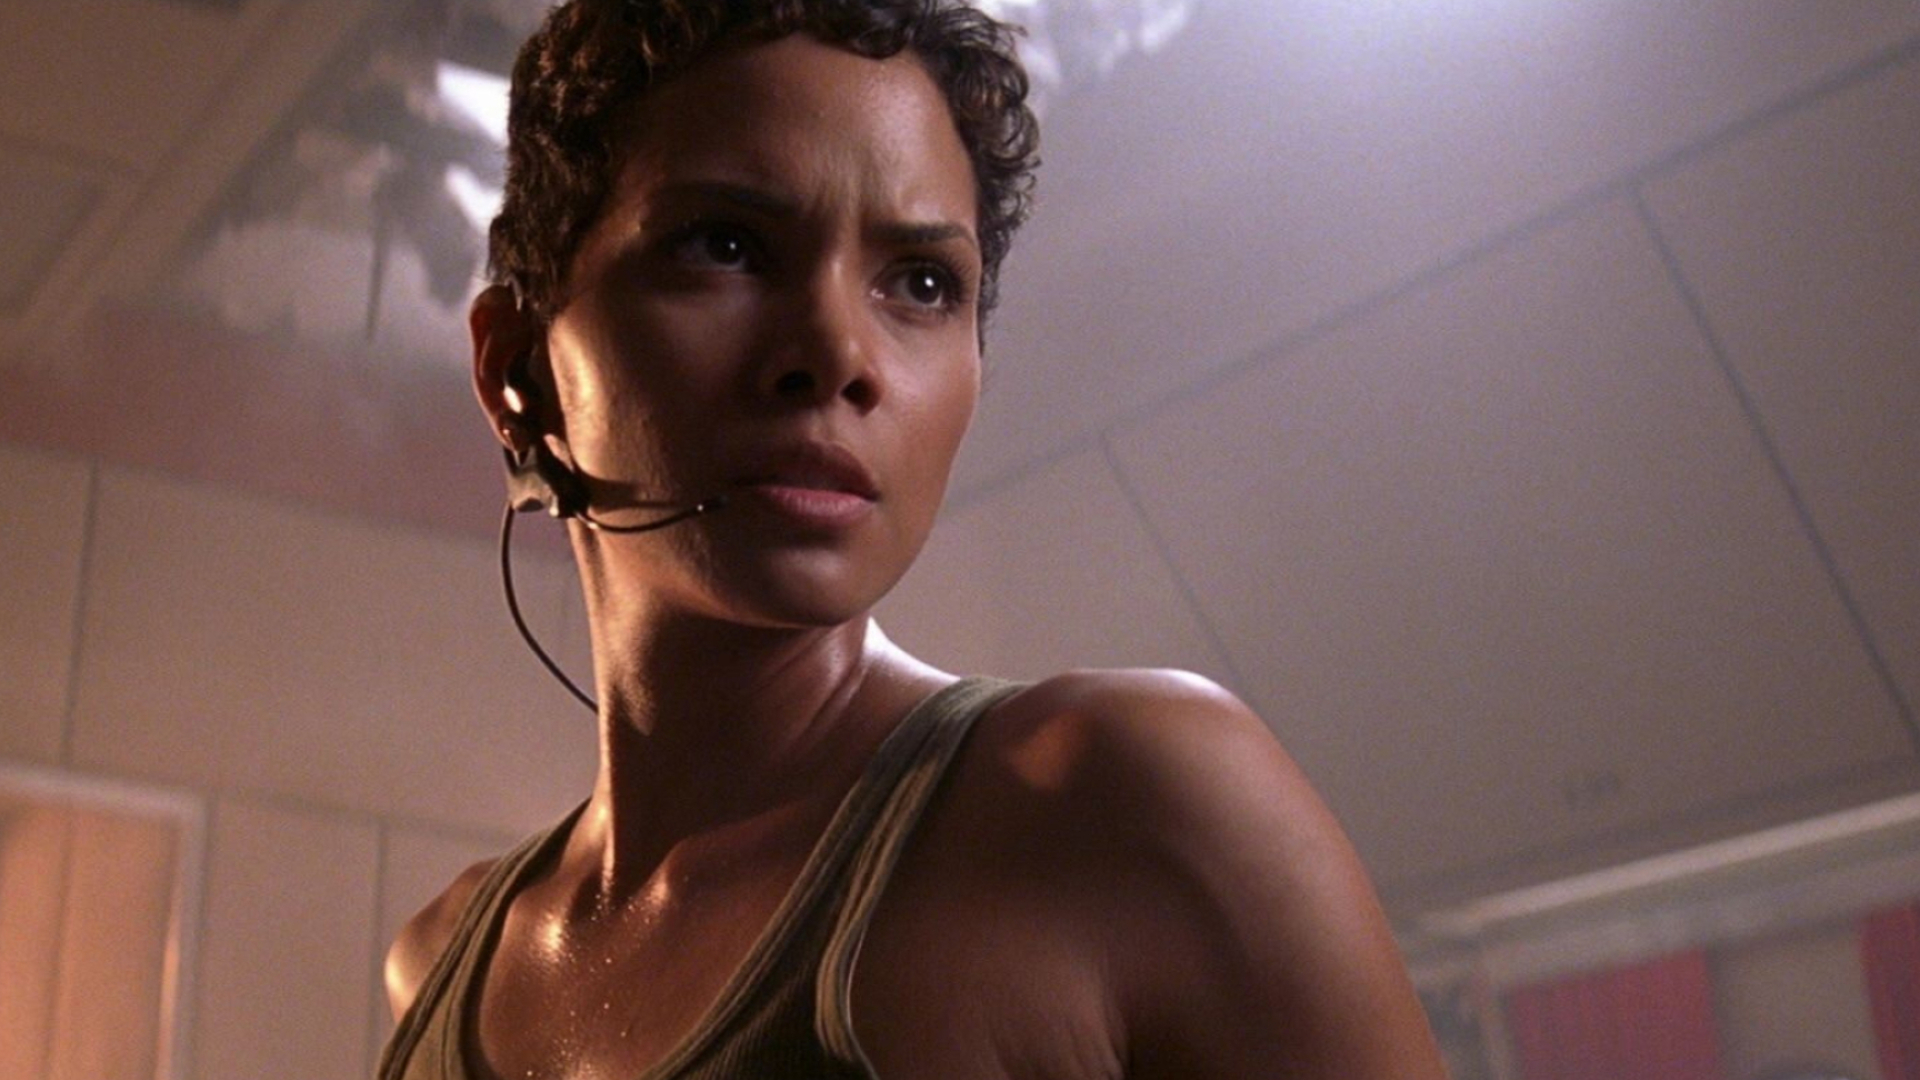 Die Another Day: Halle Berry, The Bond girl, Written by Neal Purvis and Robert Wade. 1920x1080 Full HD Wallpaper.